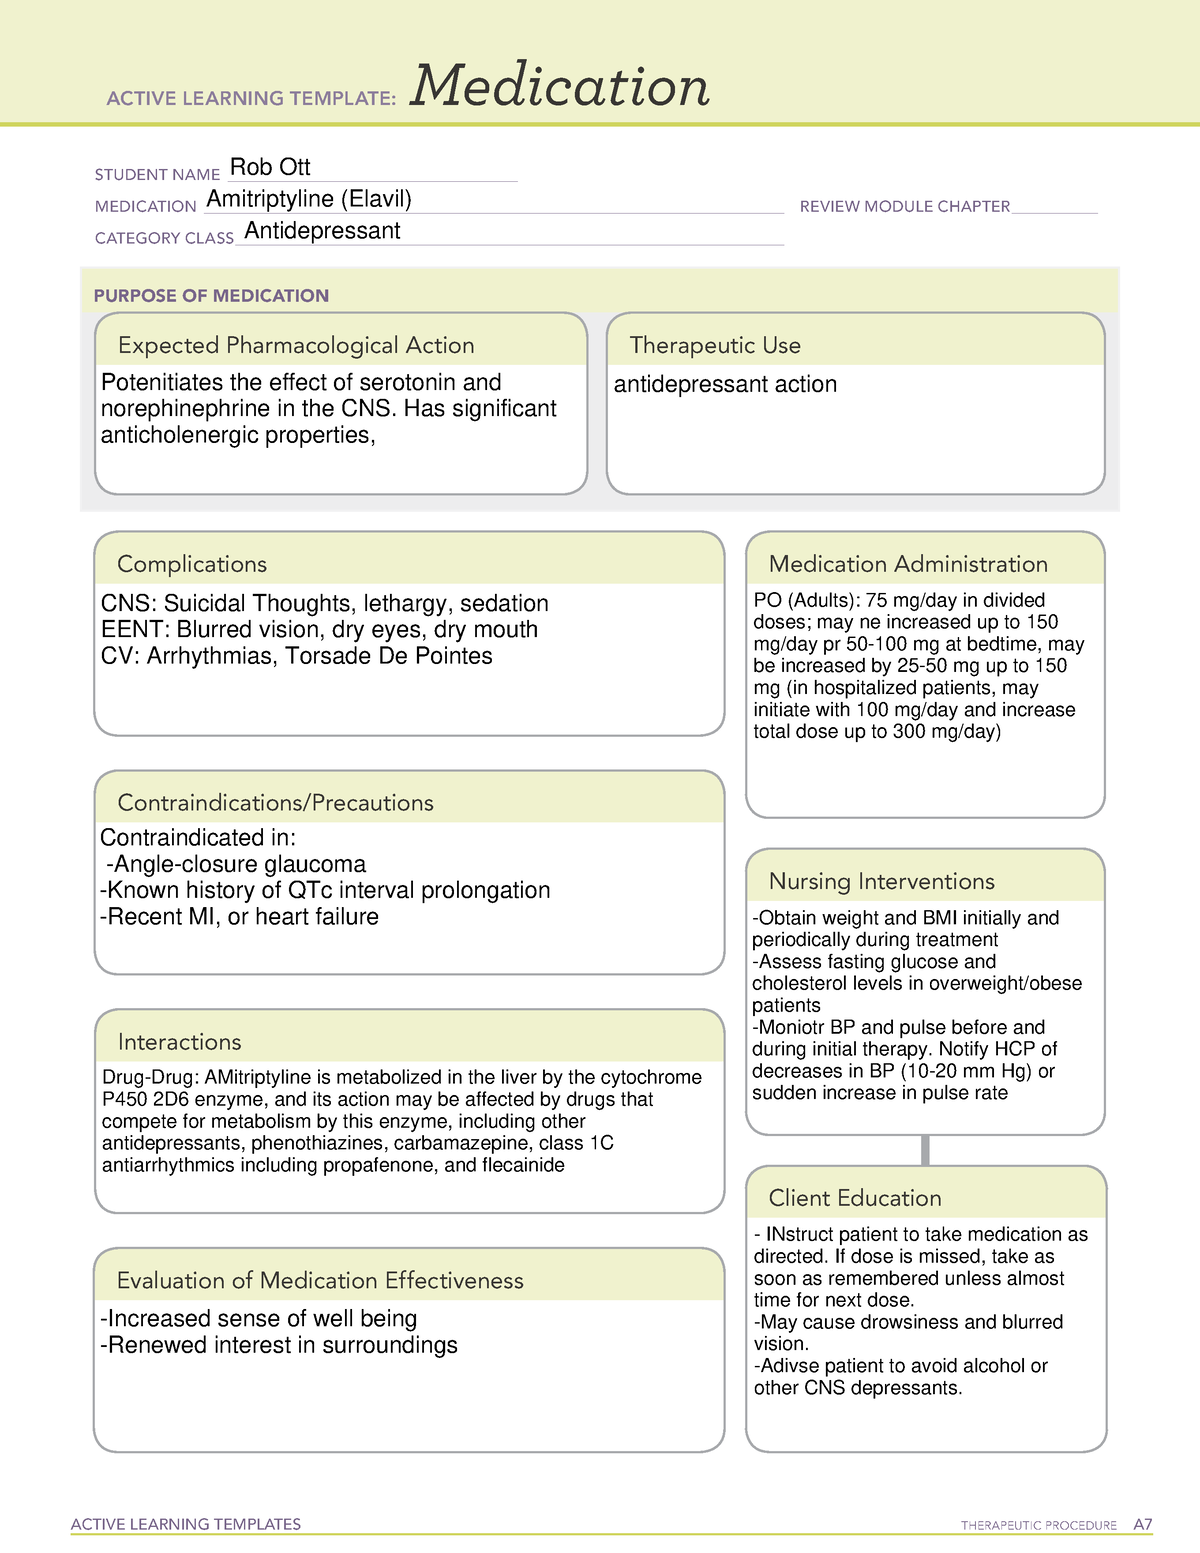 Med Card Amitriptyline ACTIVE LEARNING TEMPLATES THERAPEUTIC